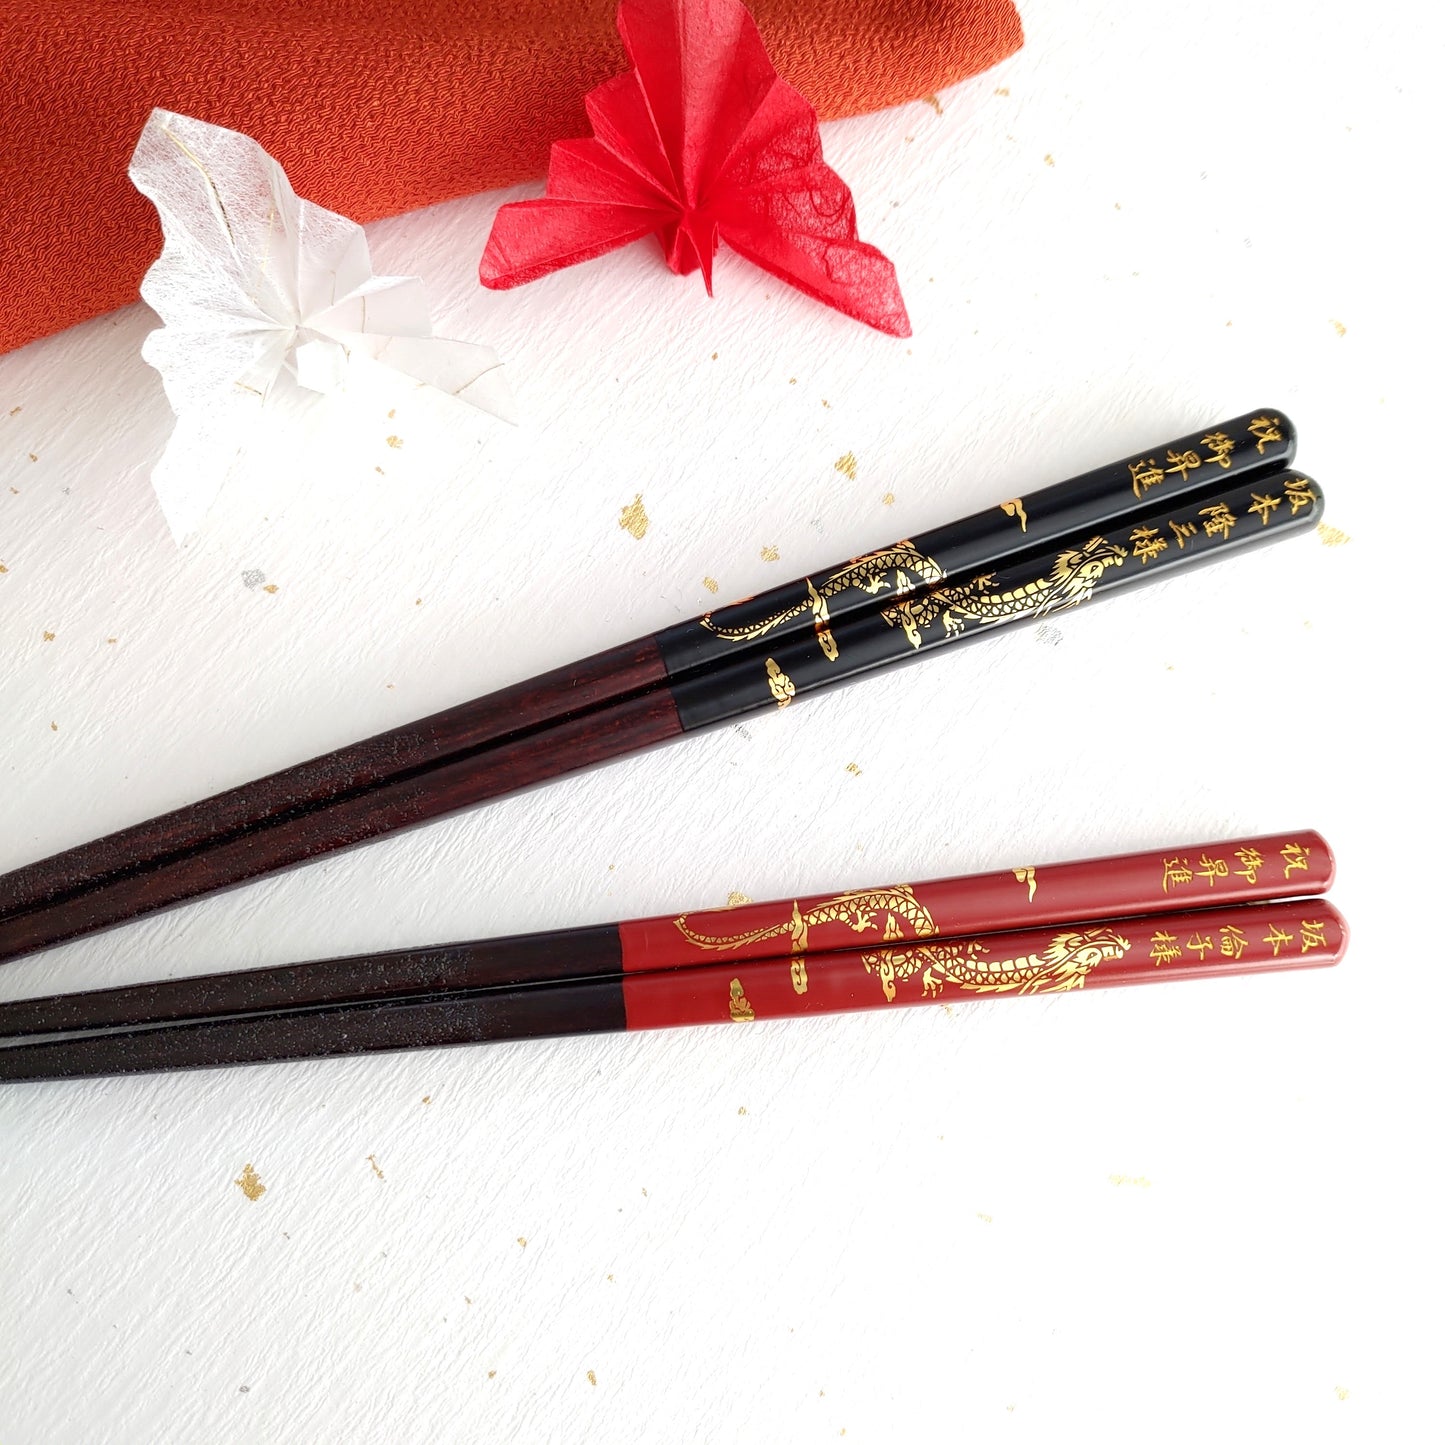 Awesome Japanese chopsticks with gold dragon floating in the clouds black red - DOUBLE PAIR